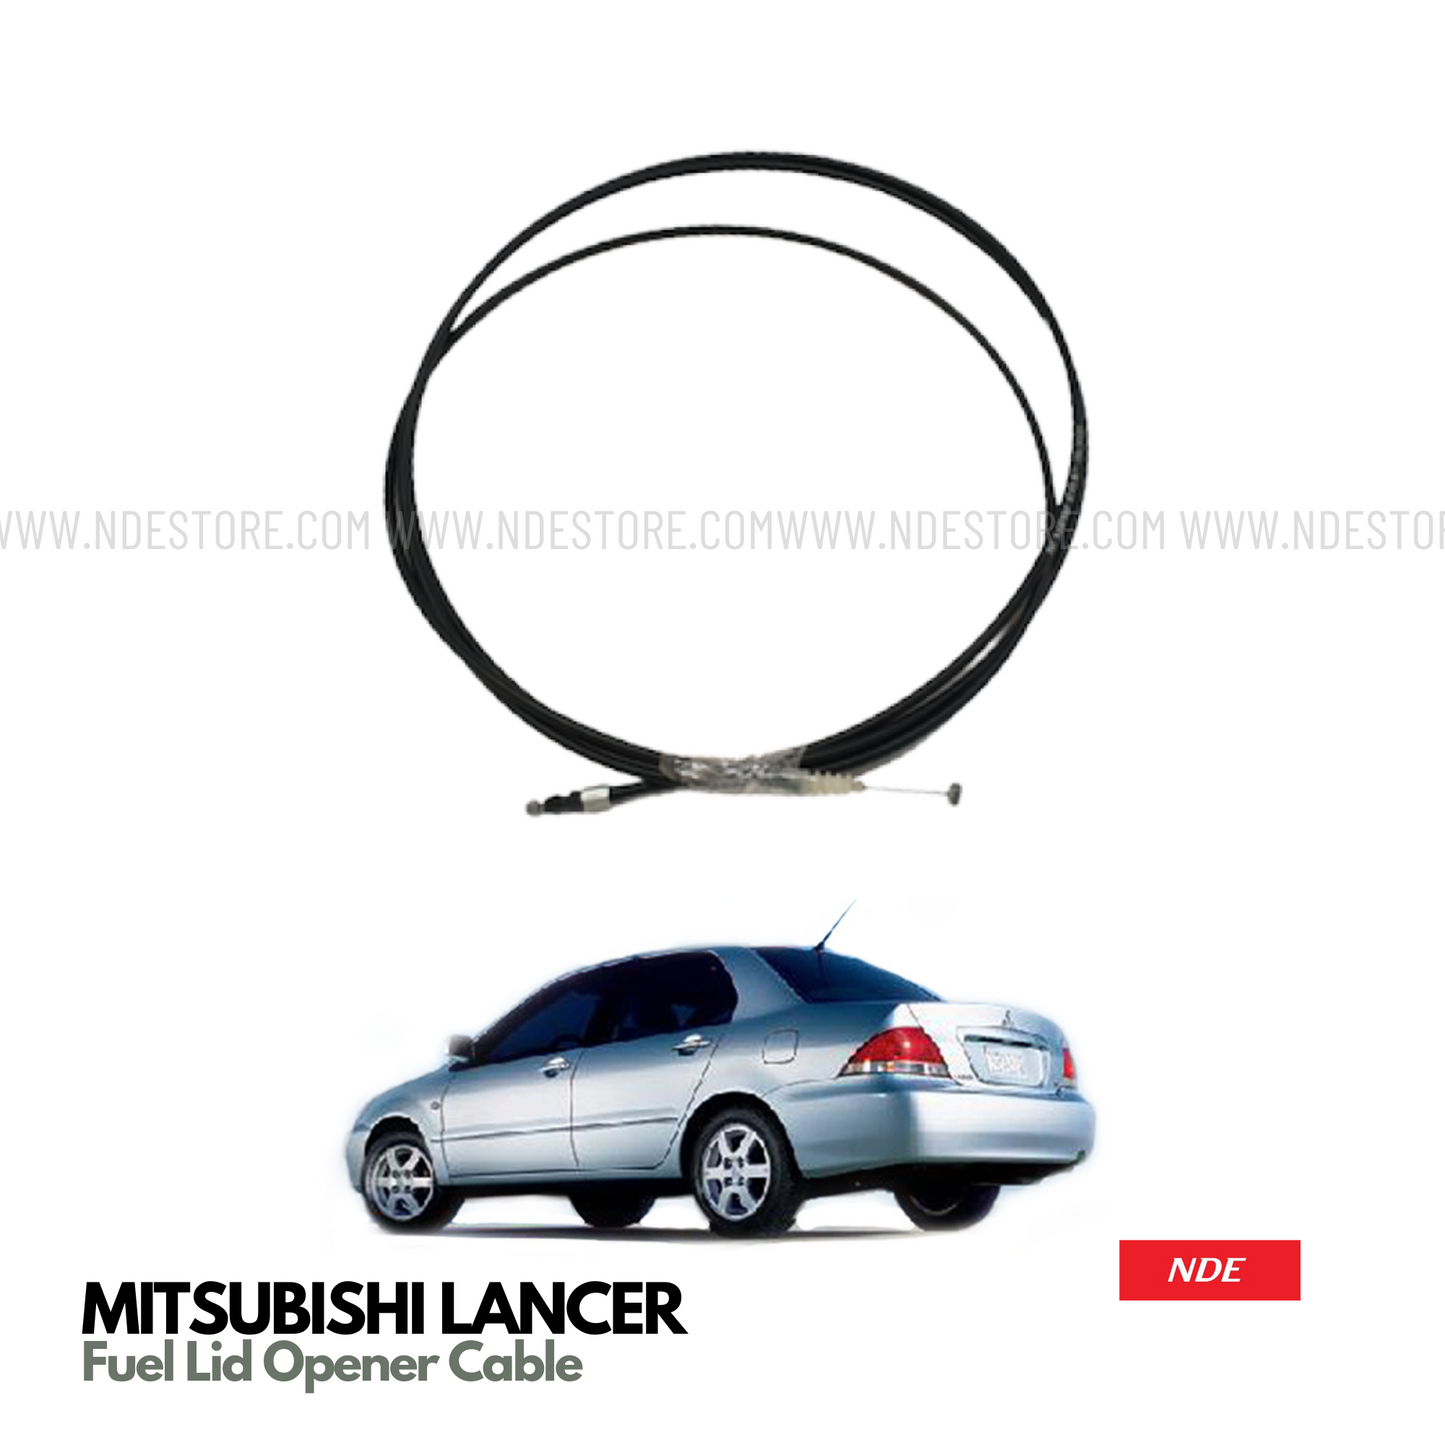 CABLE ASSY, FUEL LID OPENER CABLE FOR MITSUBISHI LANCER